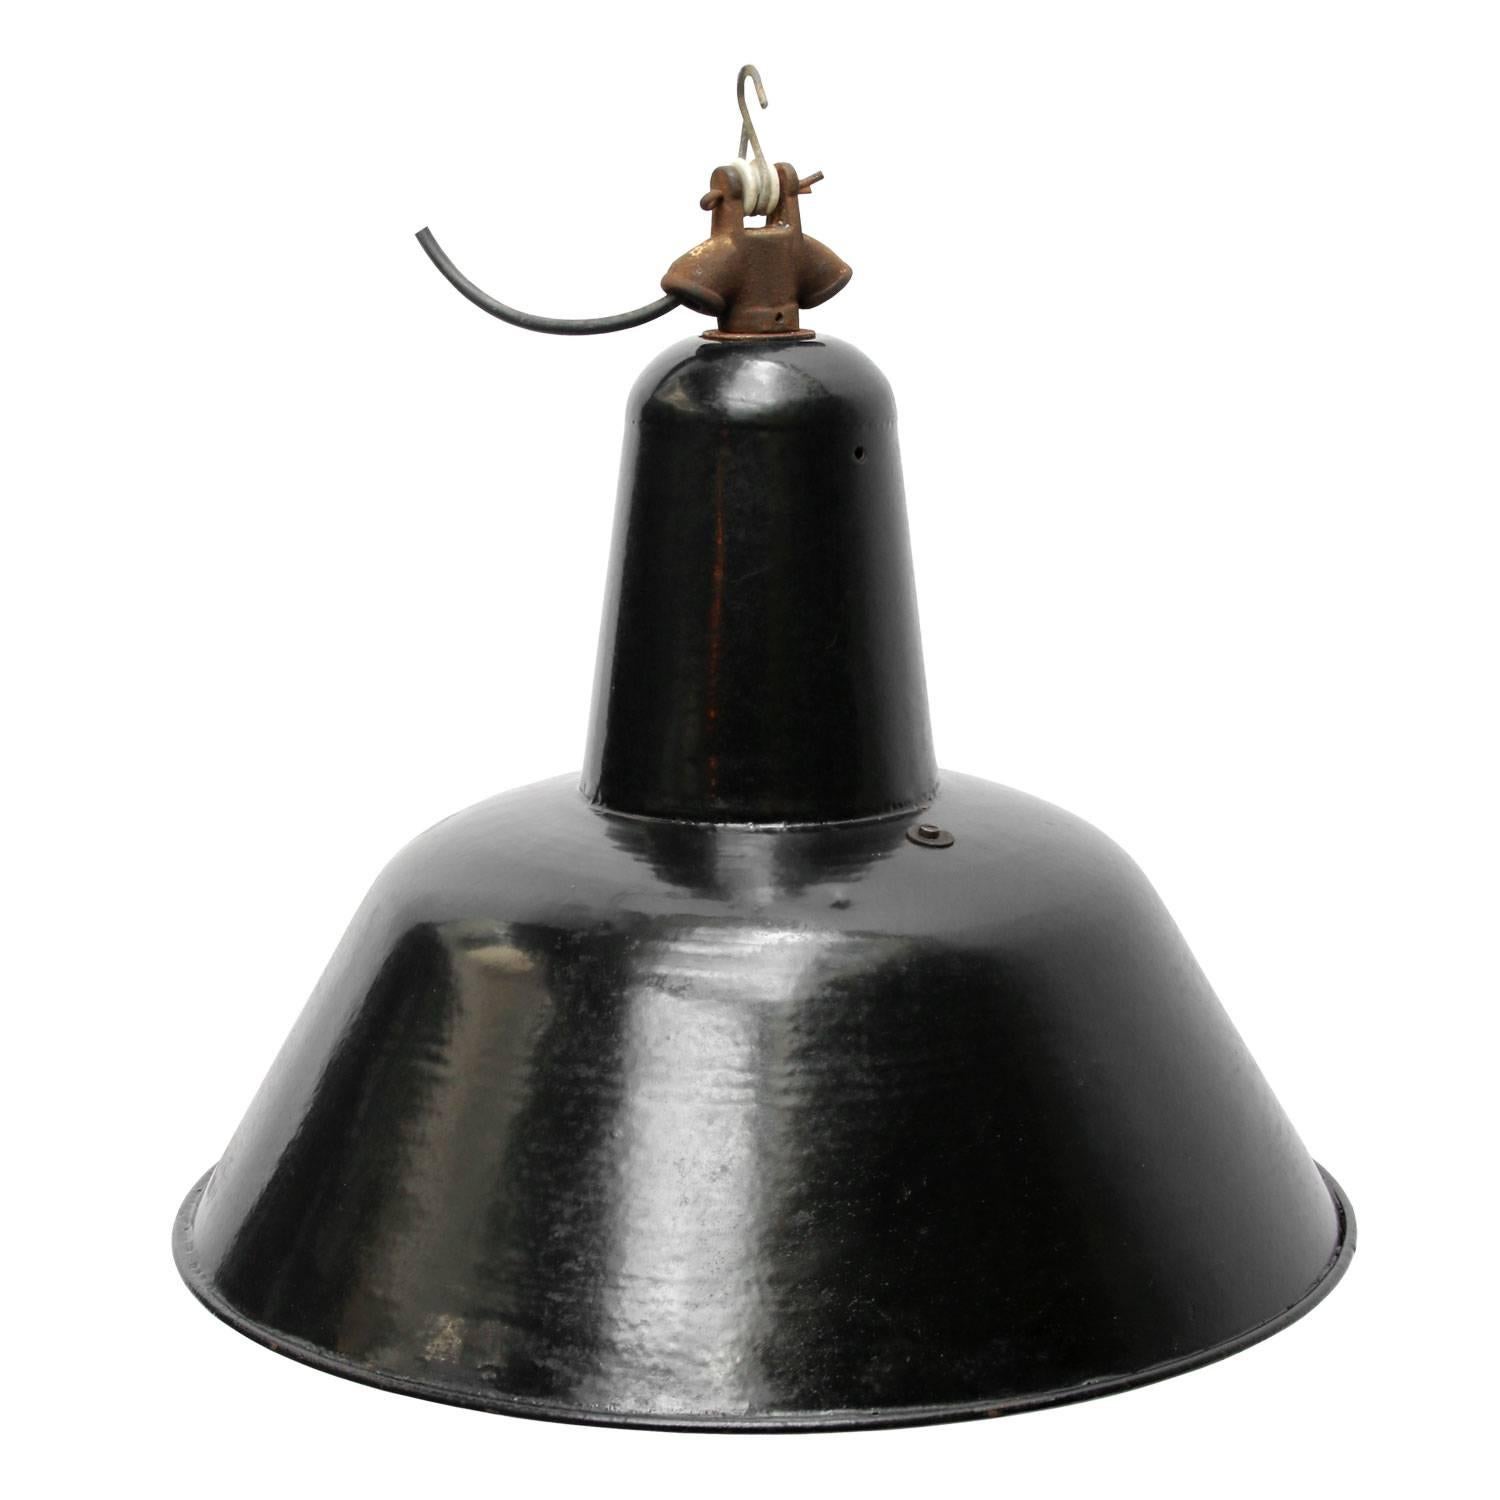 Factory lamp black enamel. White interior cast iron top.

Weight: 2.2 kg / 4.9 lb

All lamps have been made suitable by international standards for incandescent light bulbs, energy-efficient and LED bulbs. E26/E27 bulb holders and new wiring are